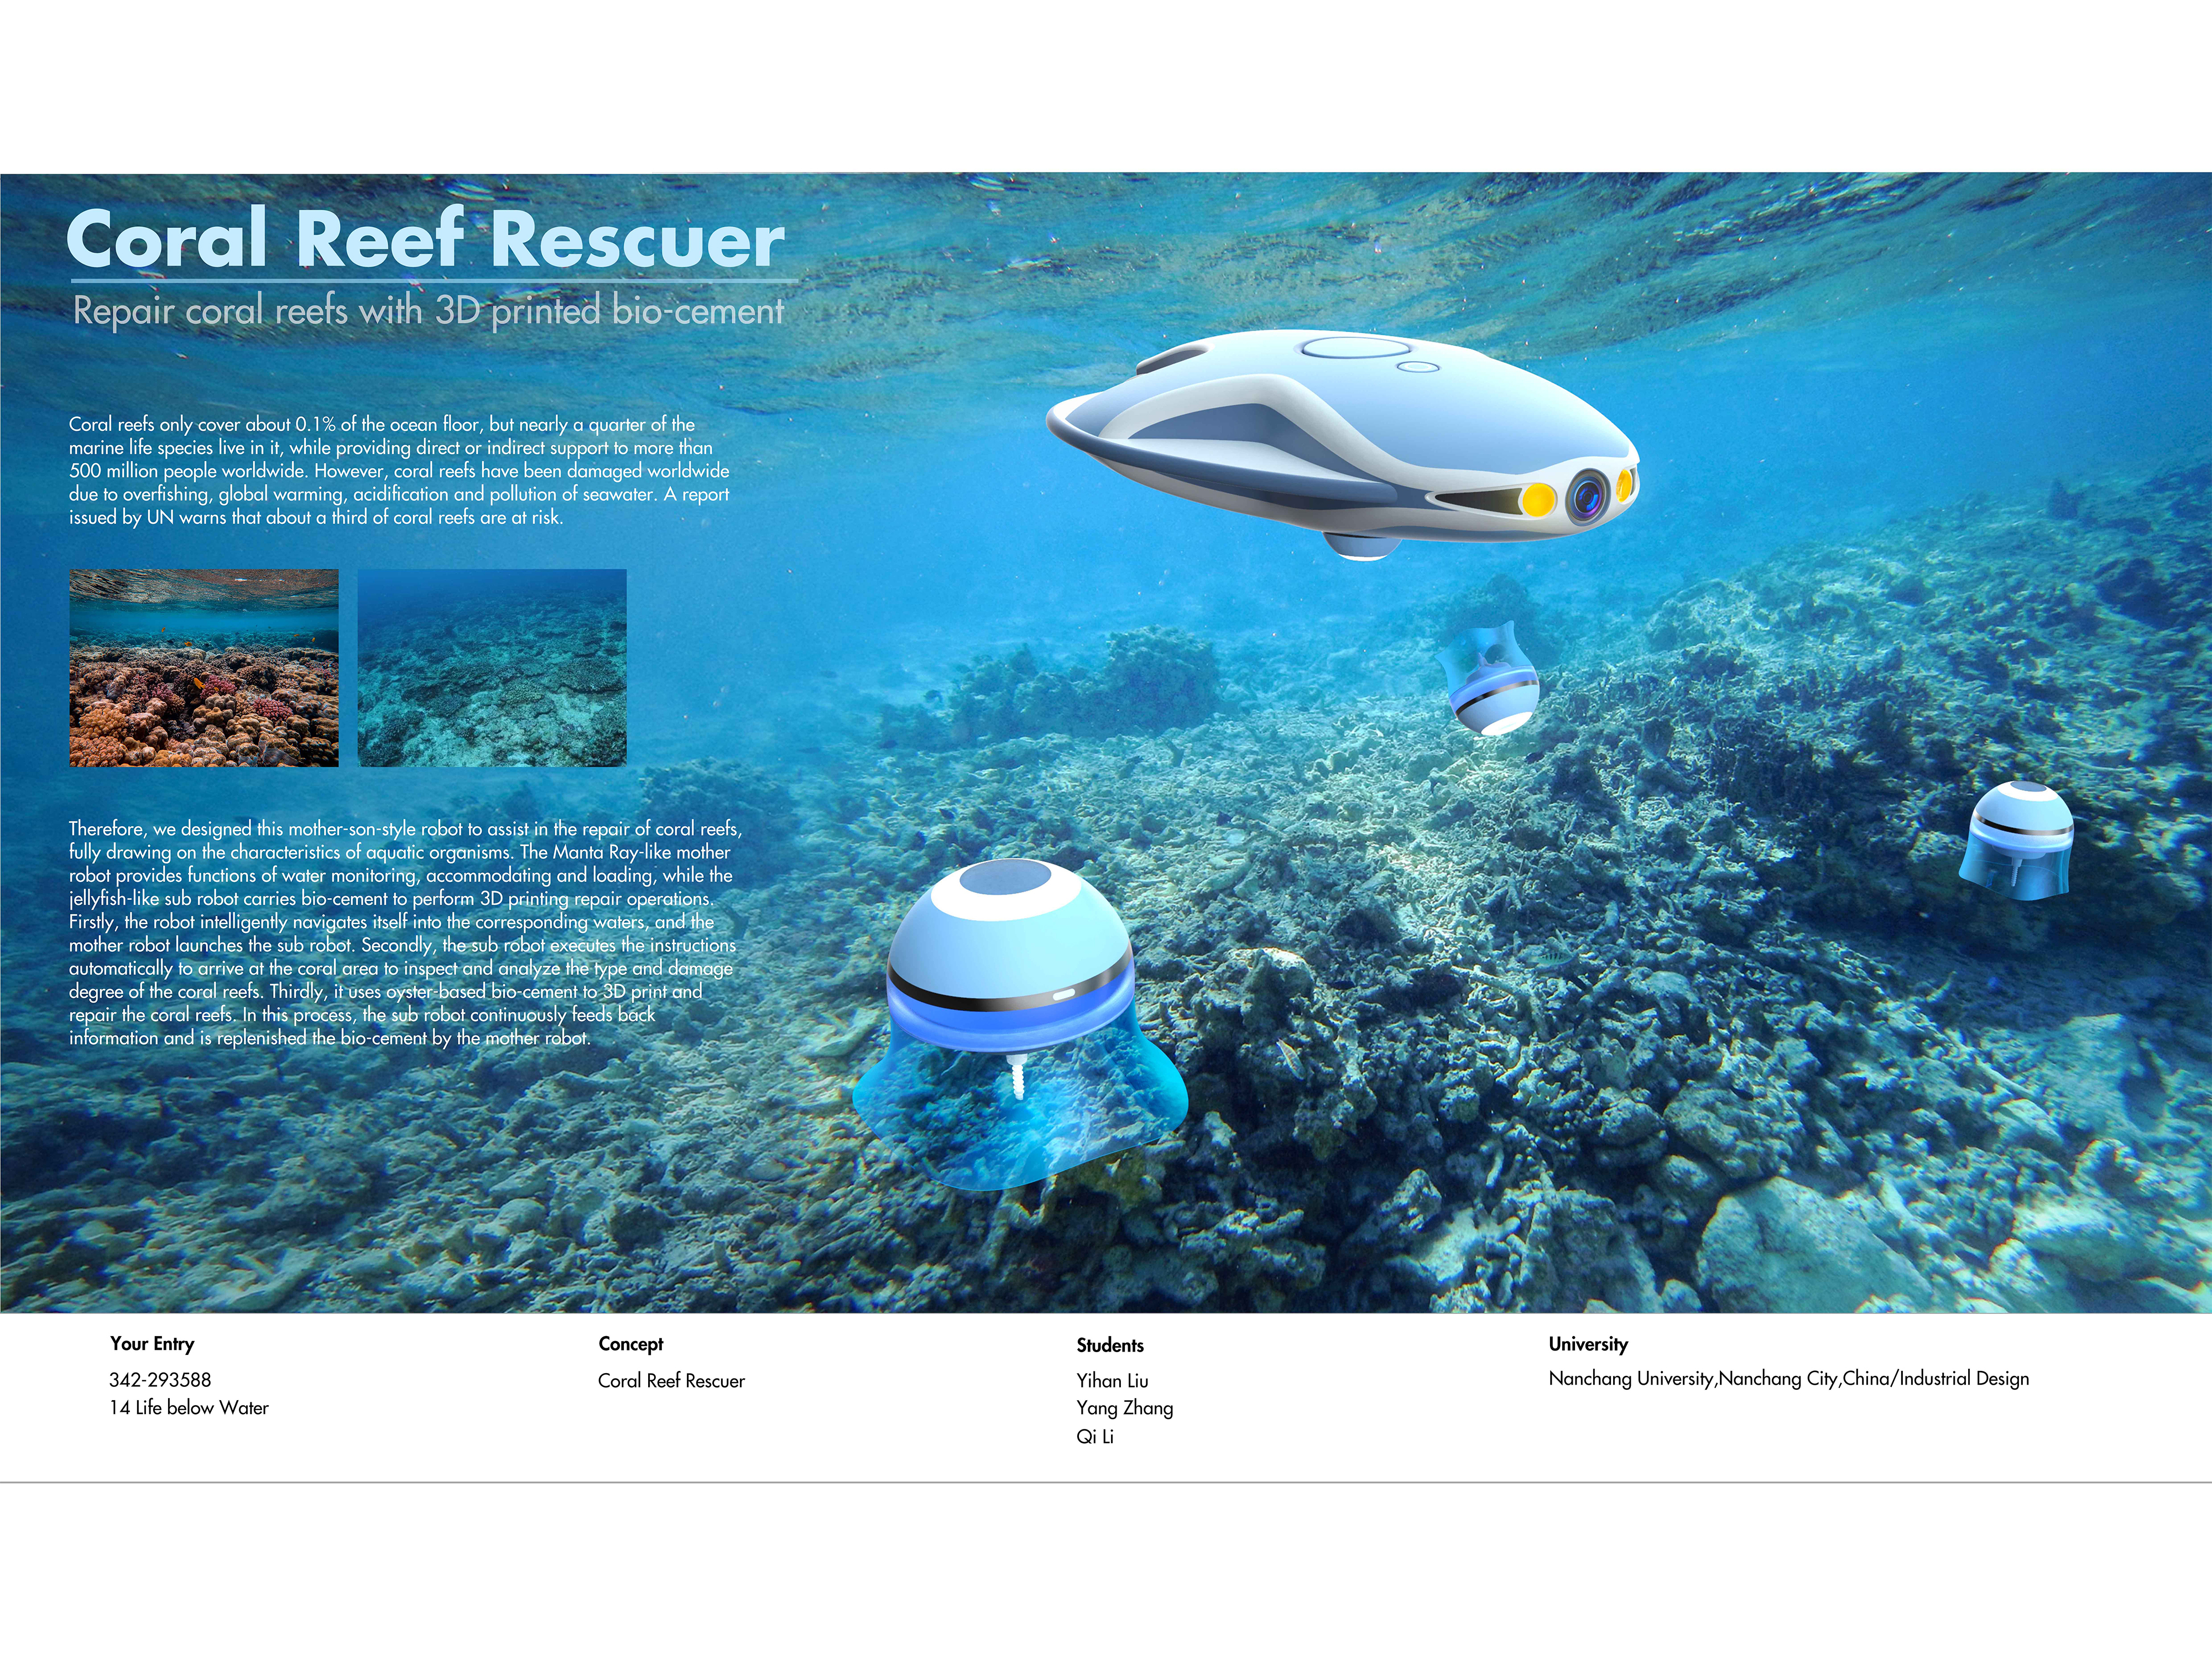 Coral Reef Rescuer